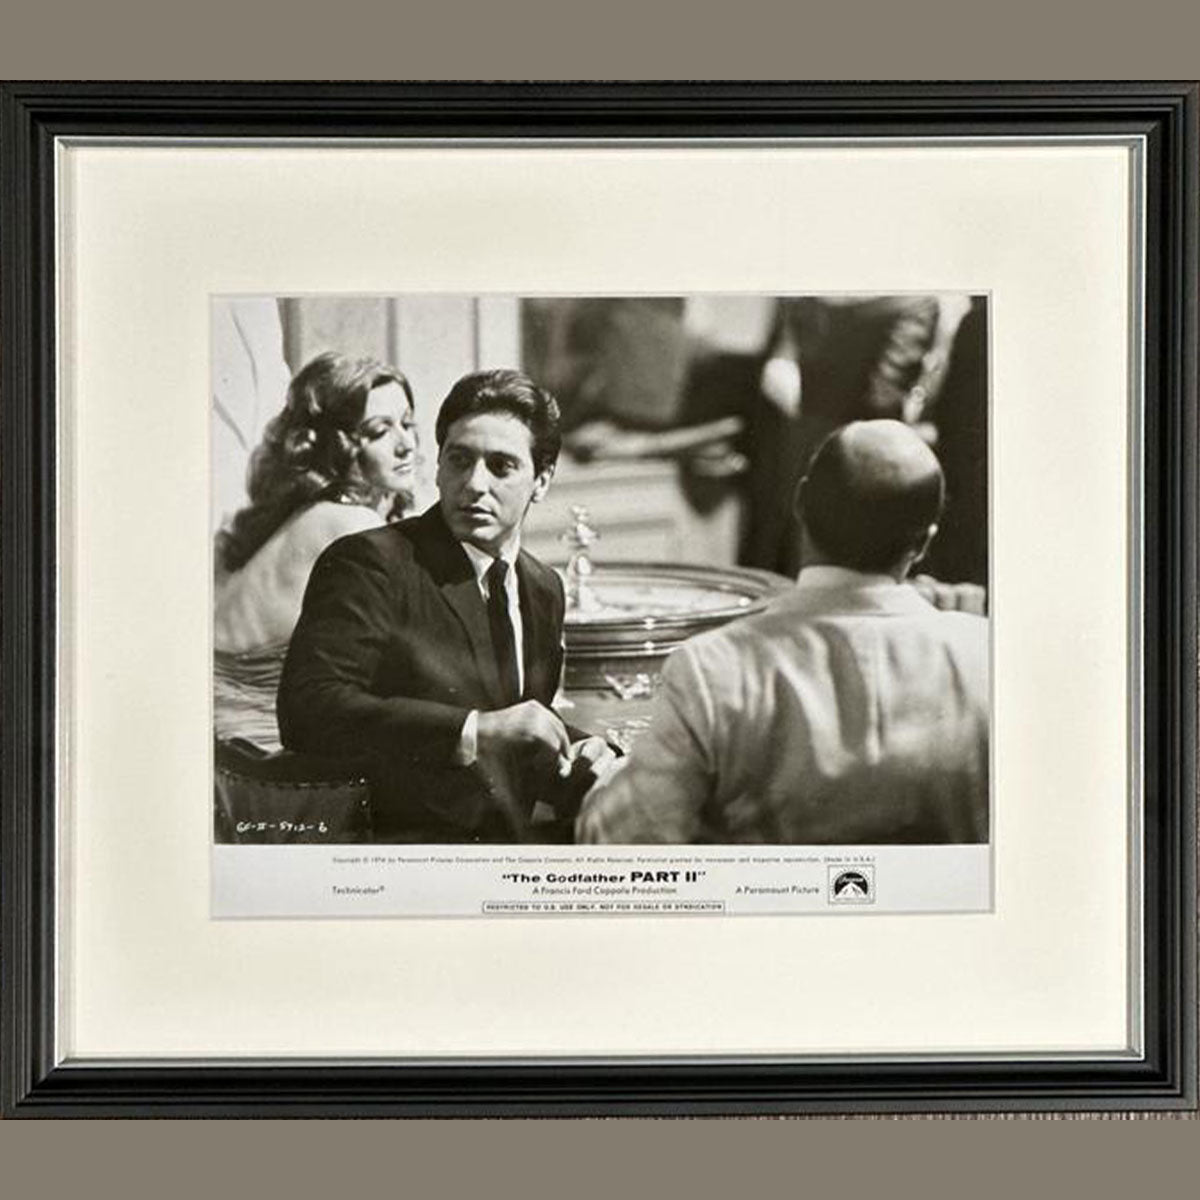 Godfather Part II, The (1974) - FRAMED